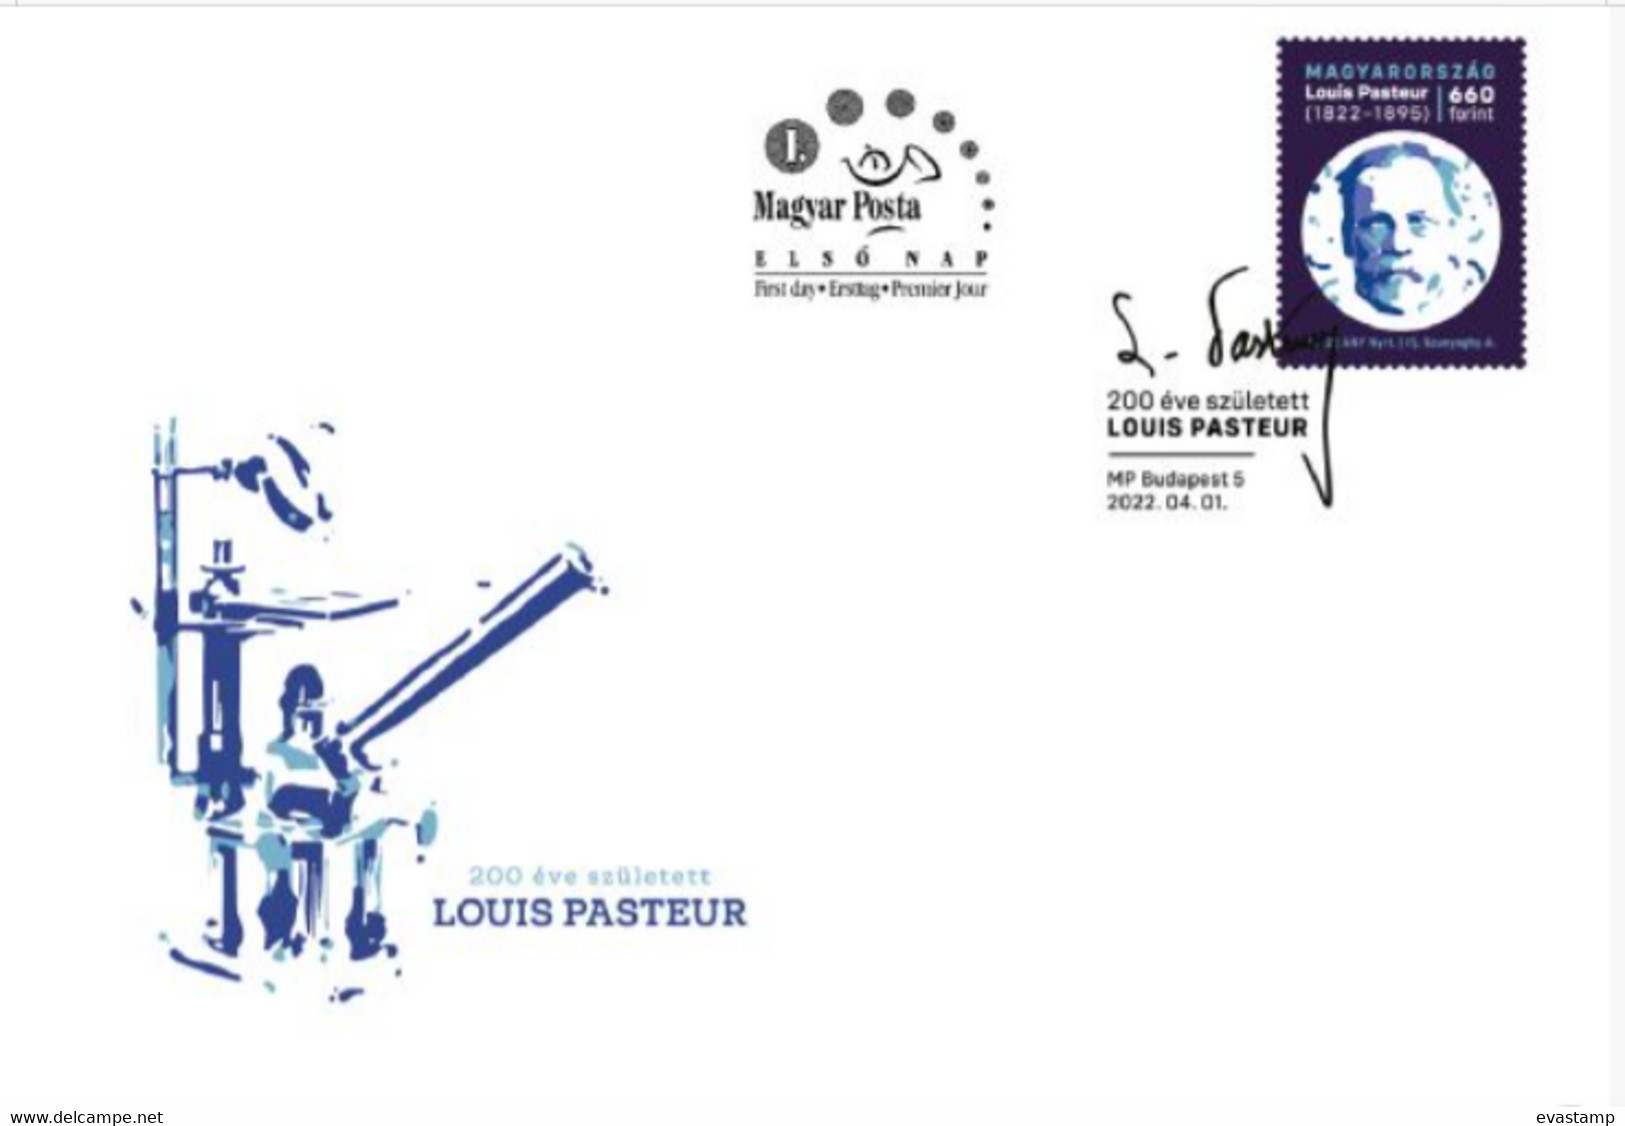 HUNGARY - 2022. FDC - 200th Anniversary Of The Birth Of Louis Pasteur / Chemist / Microbiologist  MNH!! - Louis Pasteur